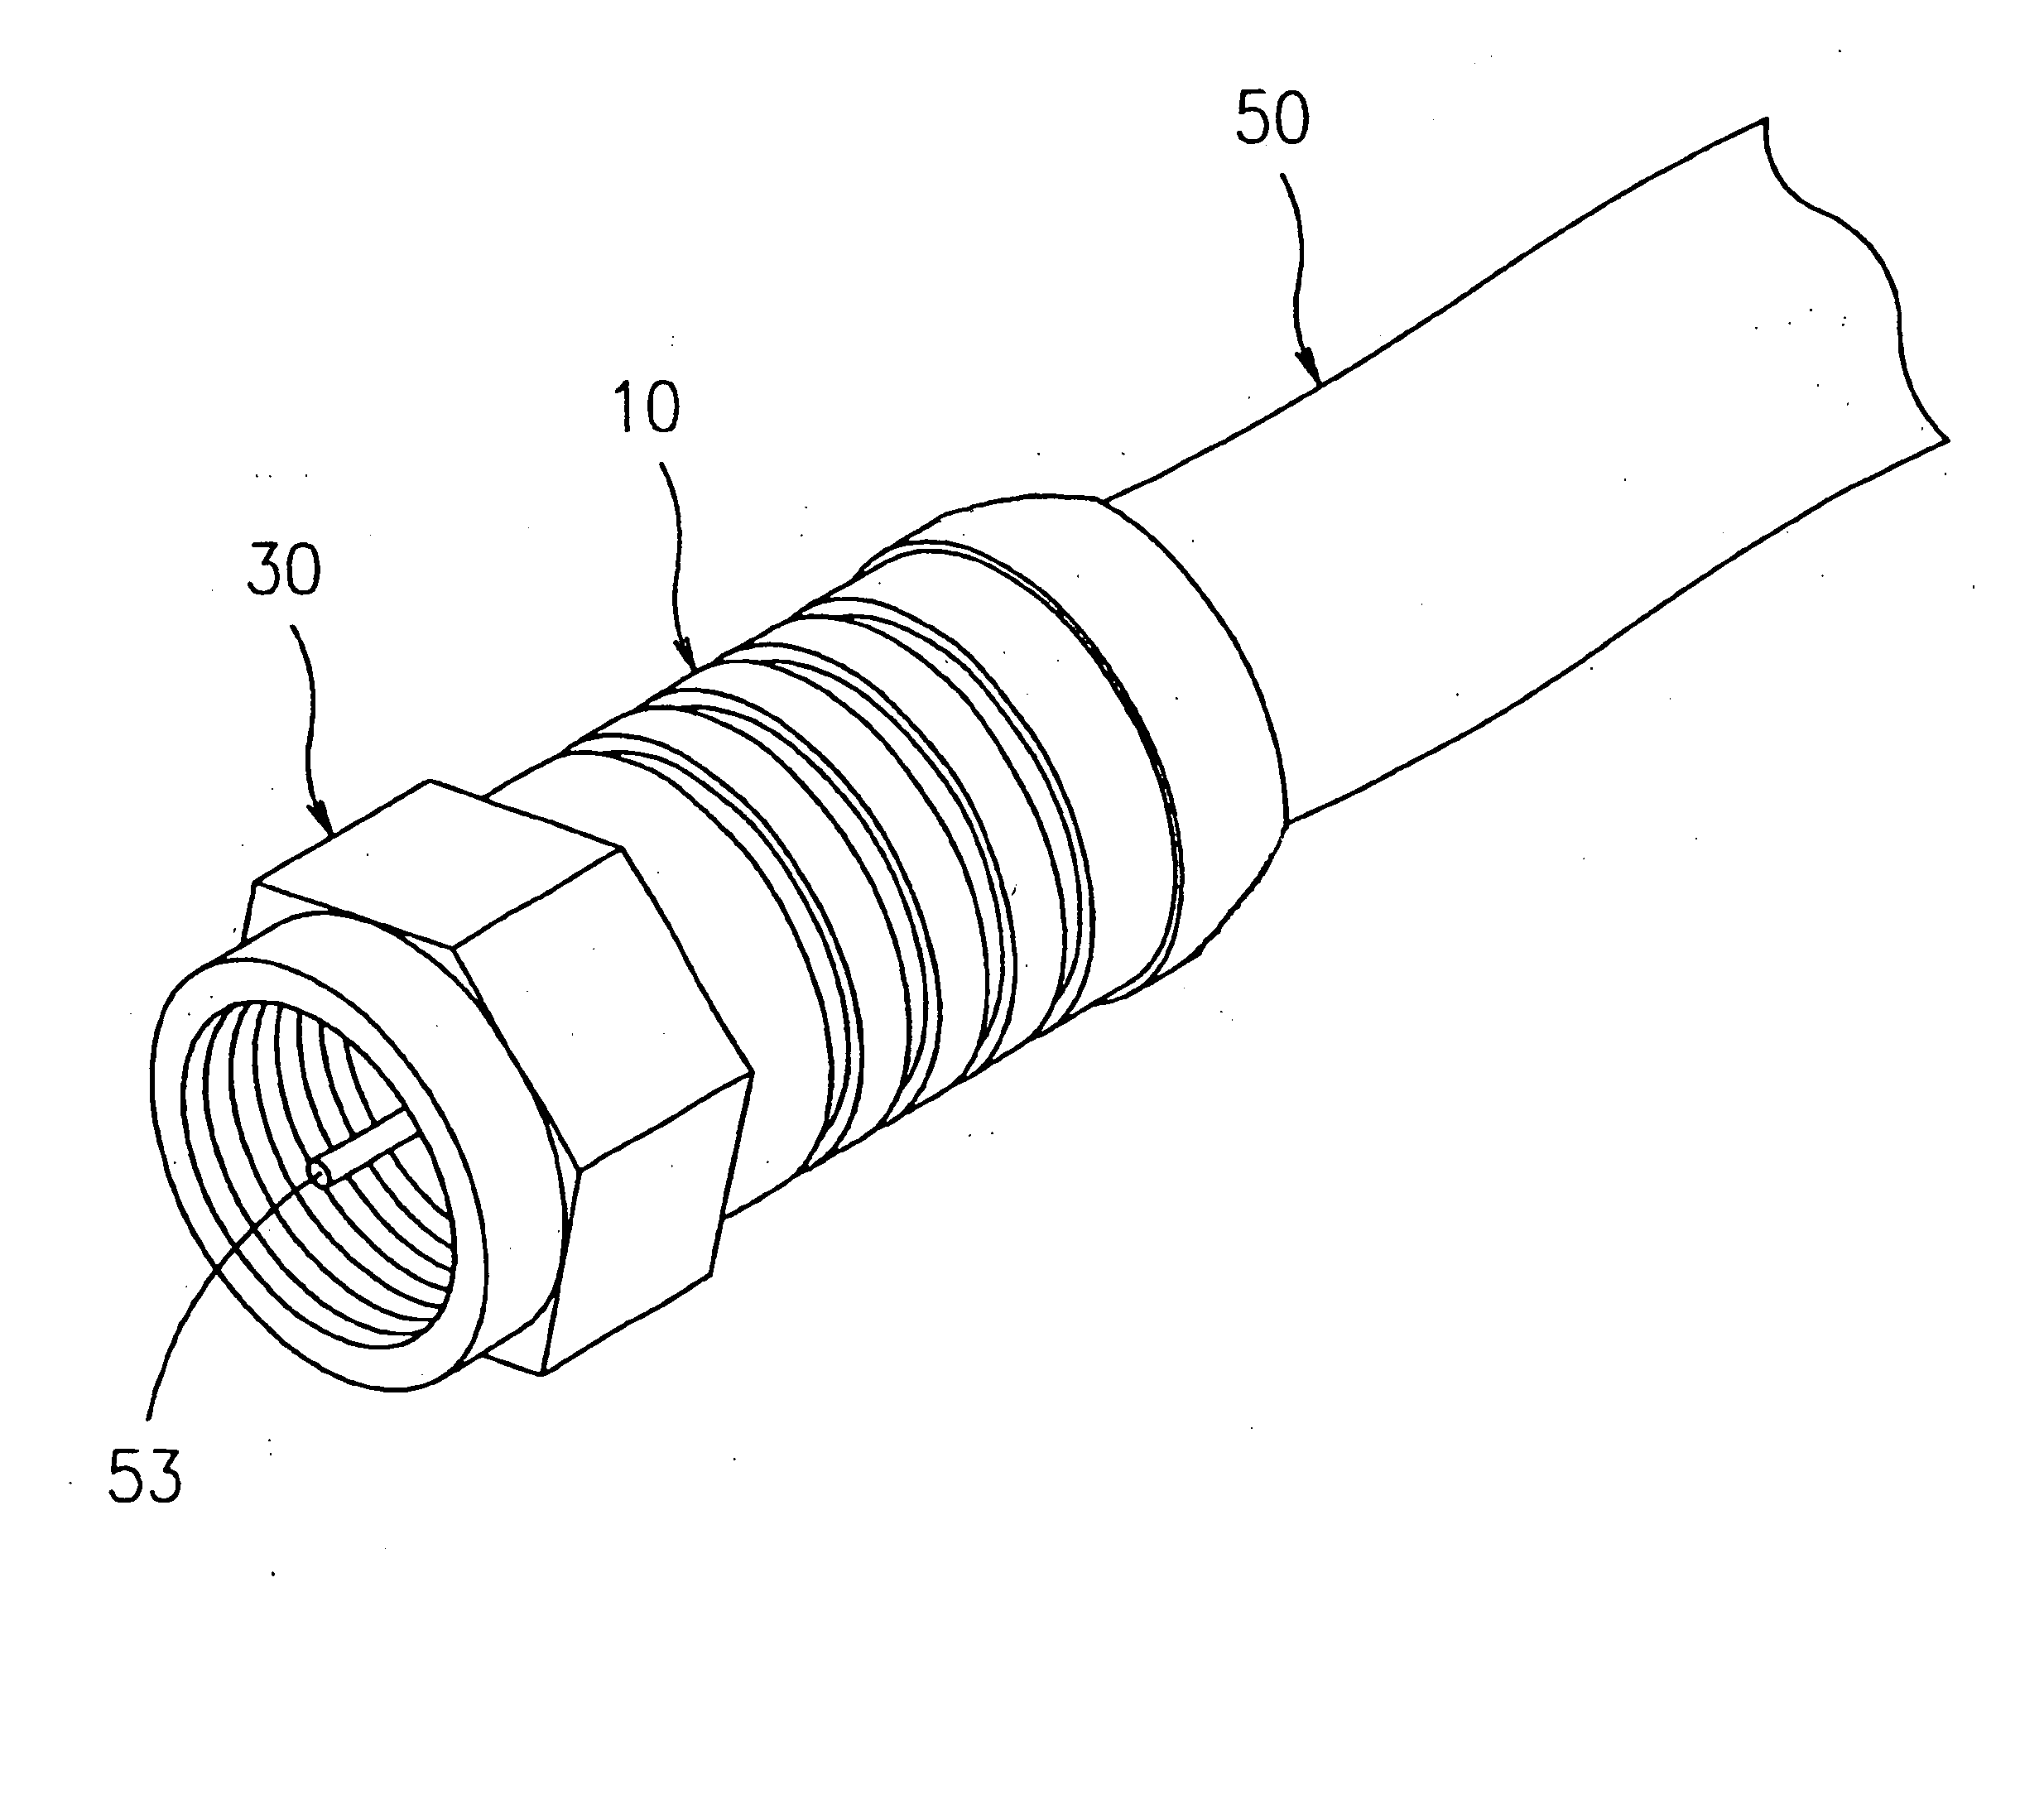 Connector for electrical cords and cables